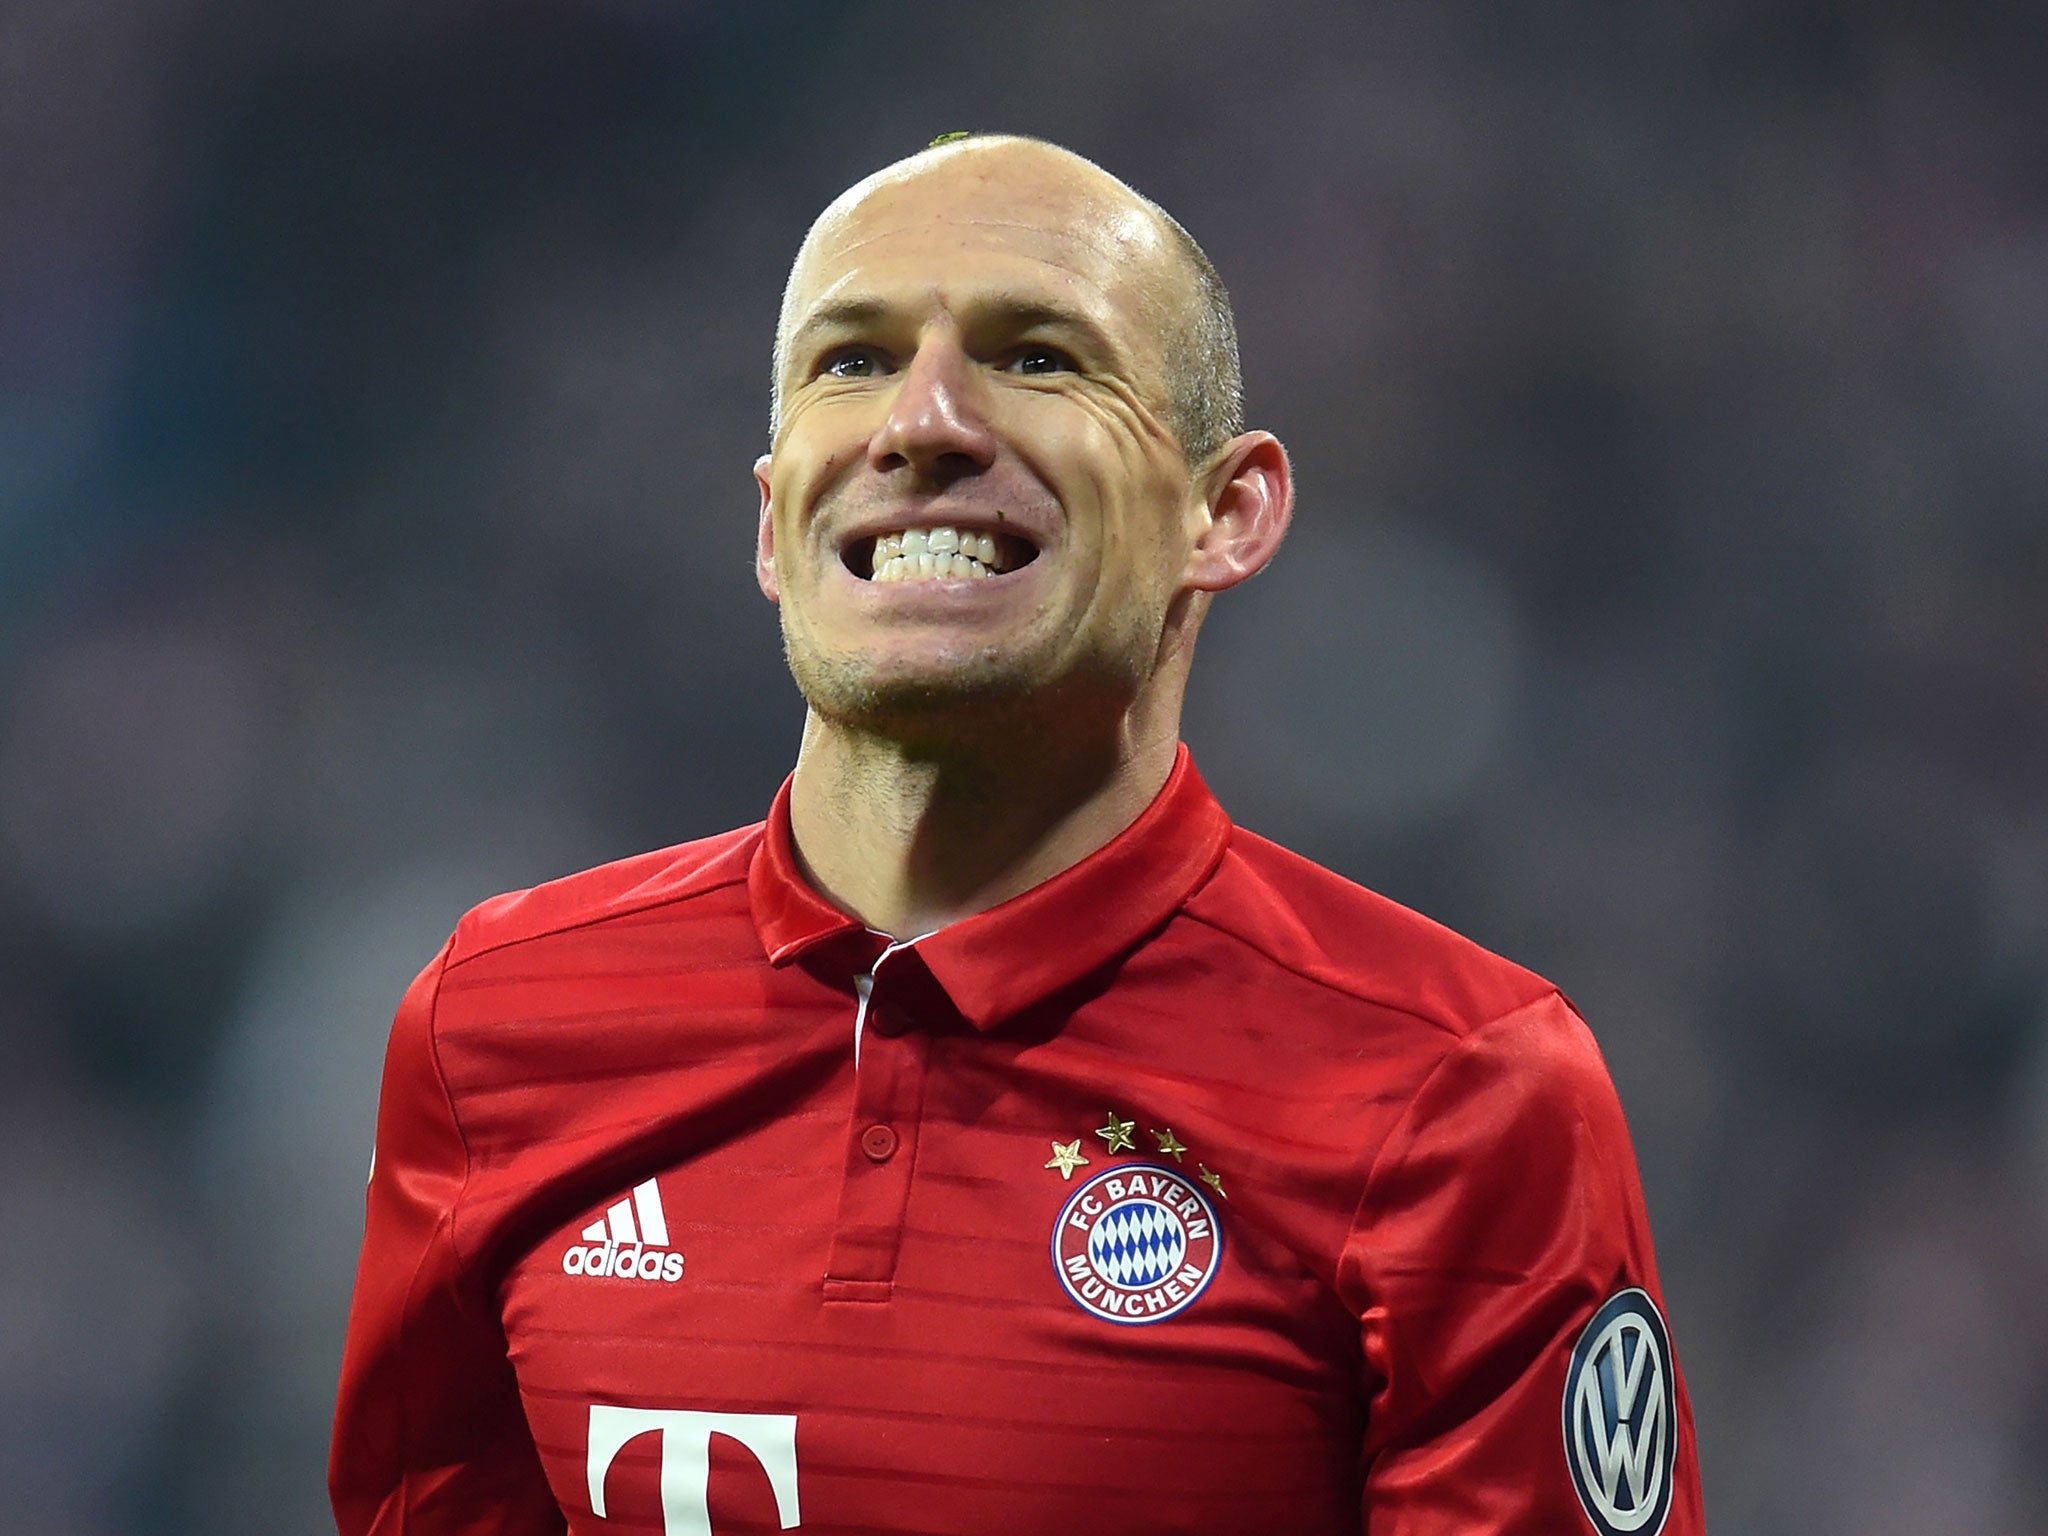 Robben would have preferred to face a team like Leicester rather than Arsenal again